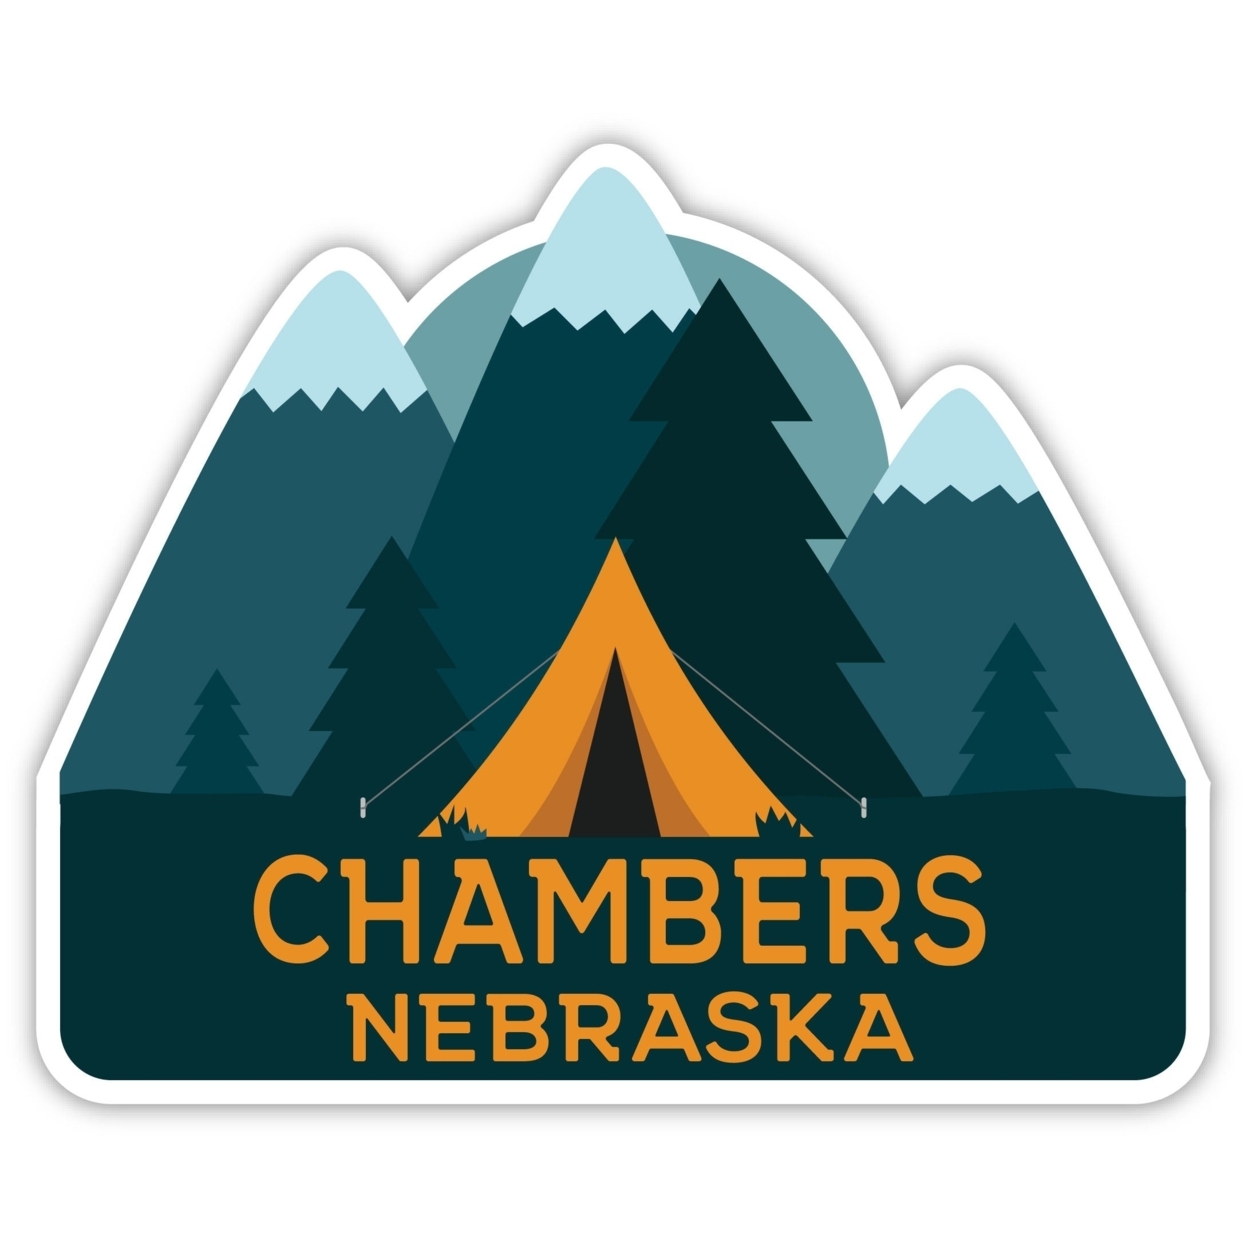 Chambers Nebraska Souvenir Decorative Stickers (Choose Theme And Size) - 4-Pack, 6-Inch, Tent